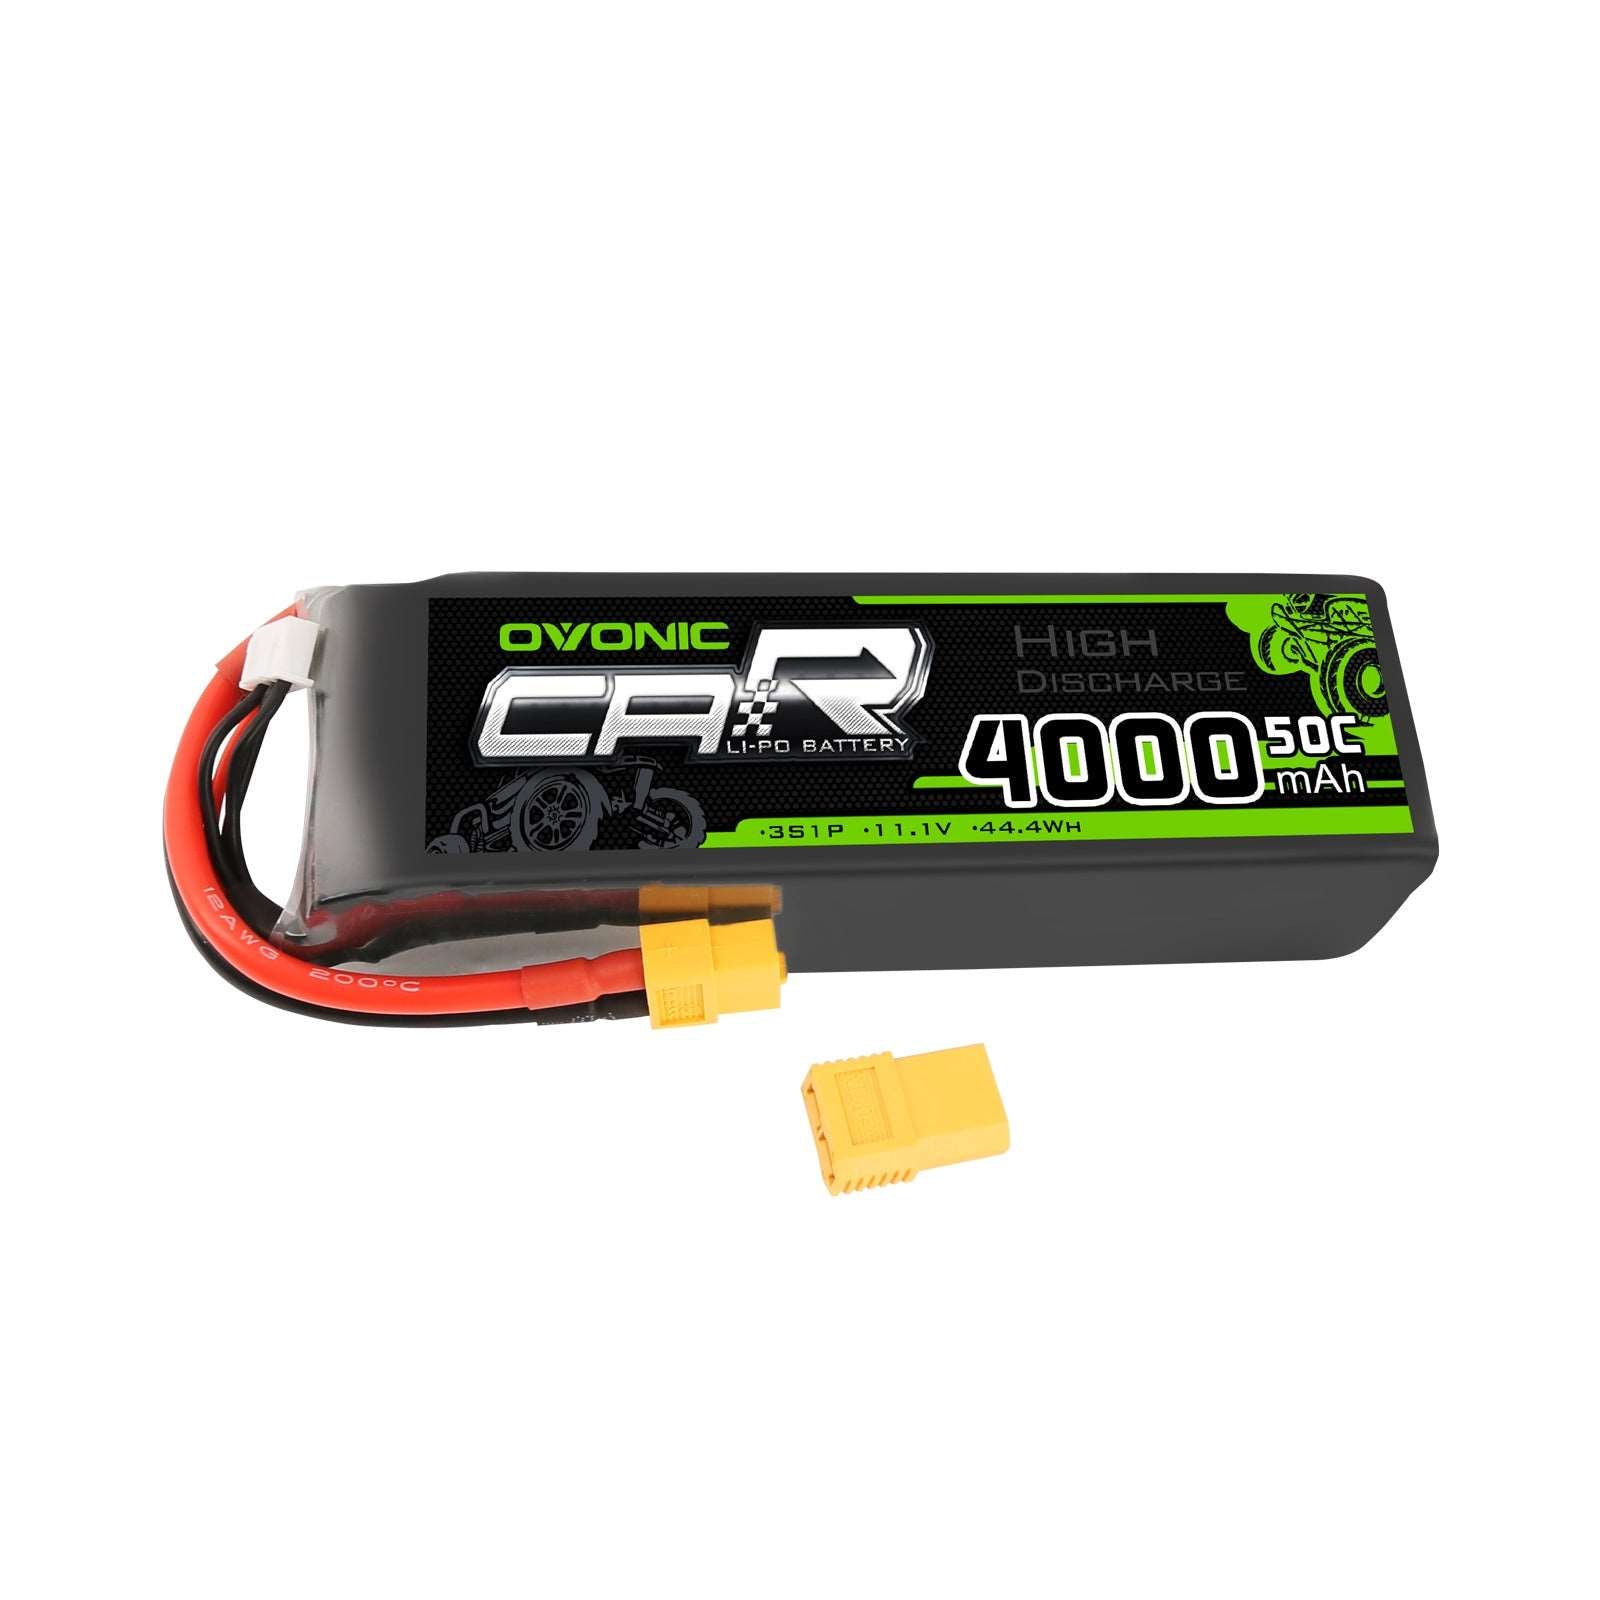 OVONIC 11.1V 50C 3S 4000mAh Lipo Battery with XT60 & Trx Plug for RC Traxxas Cars - Ampow